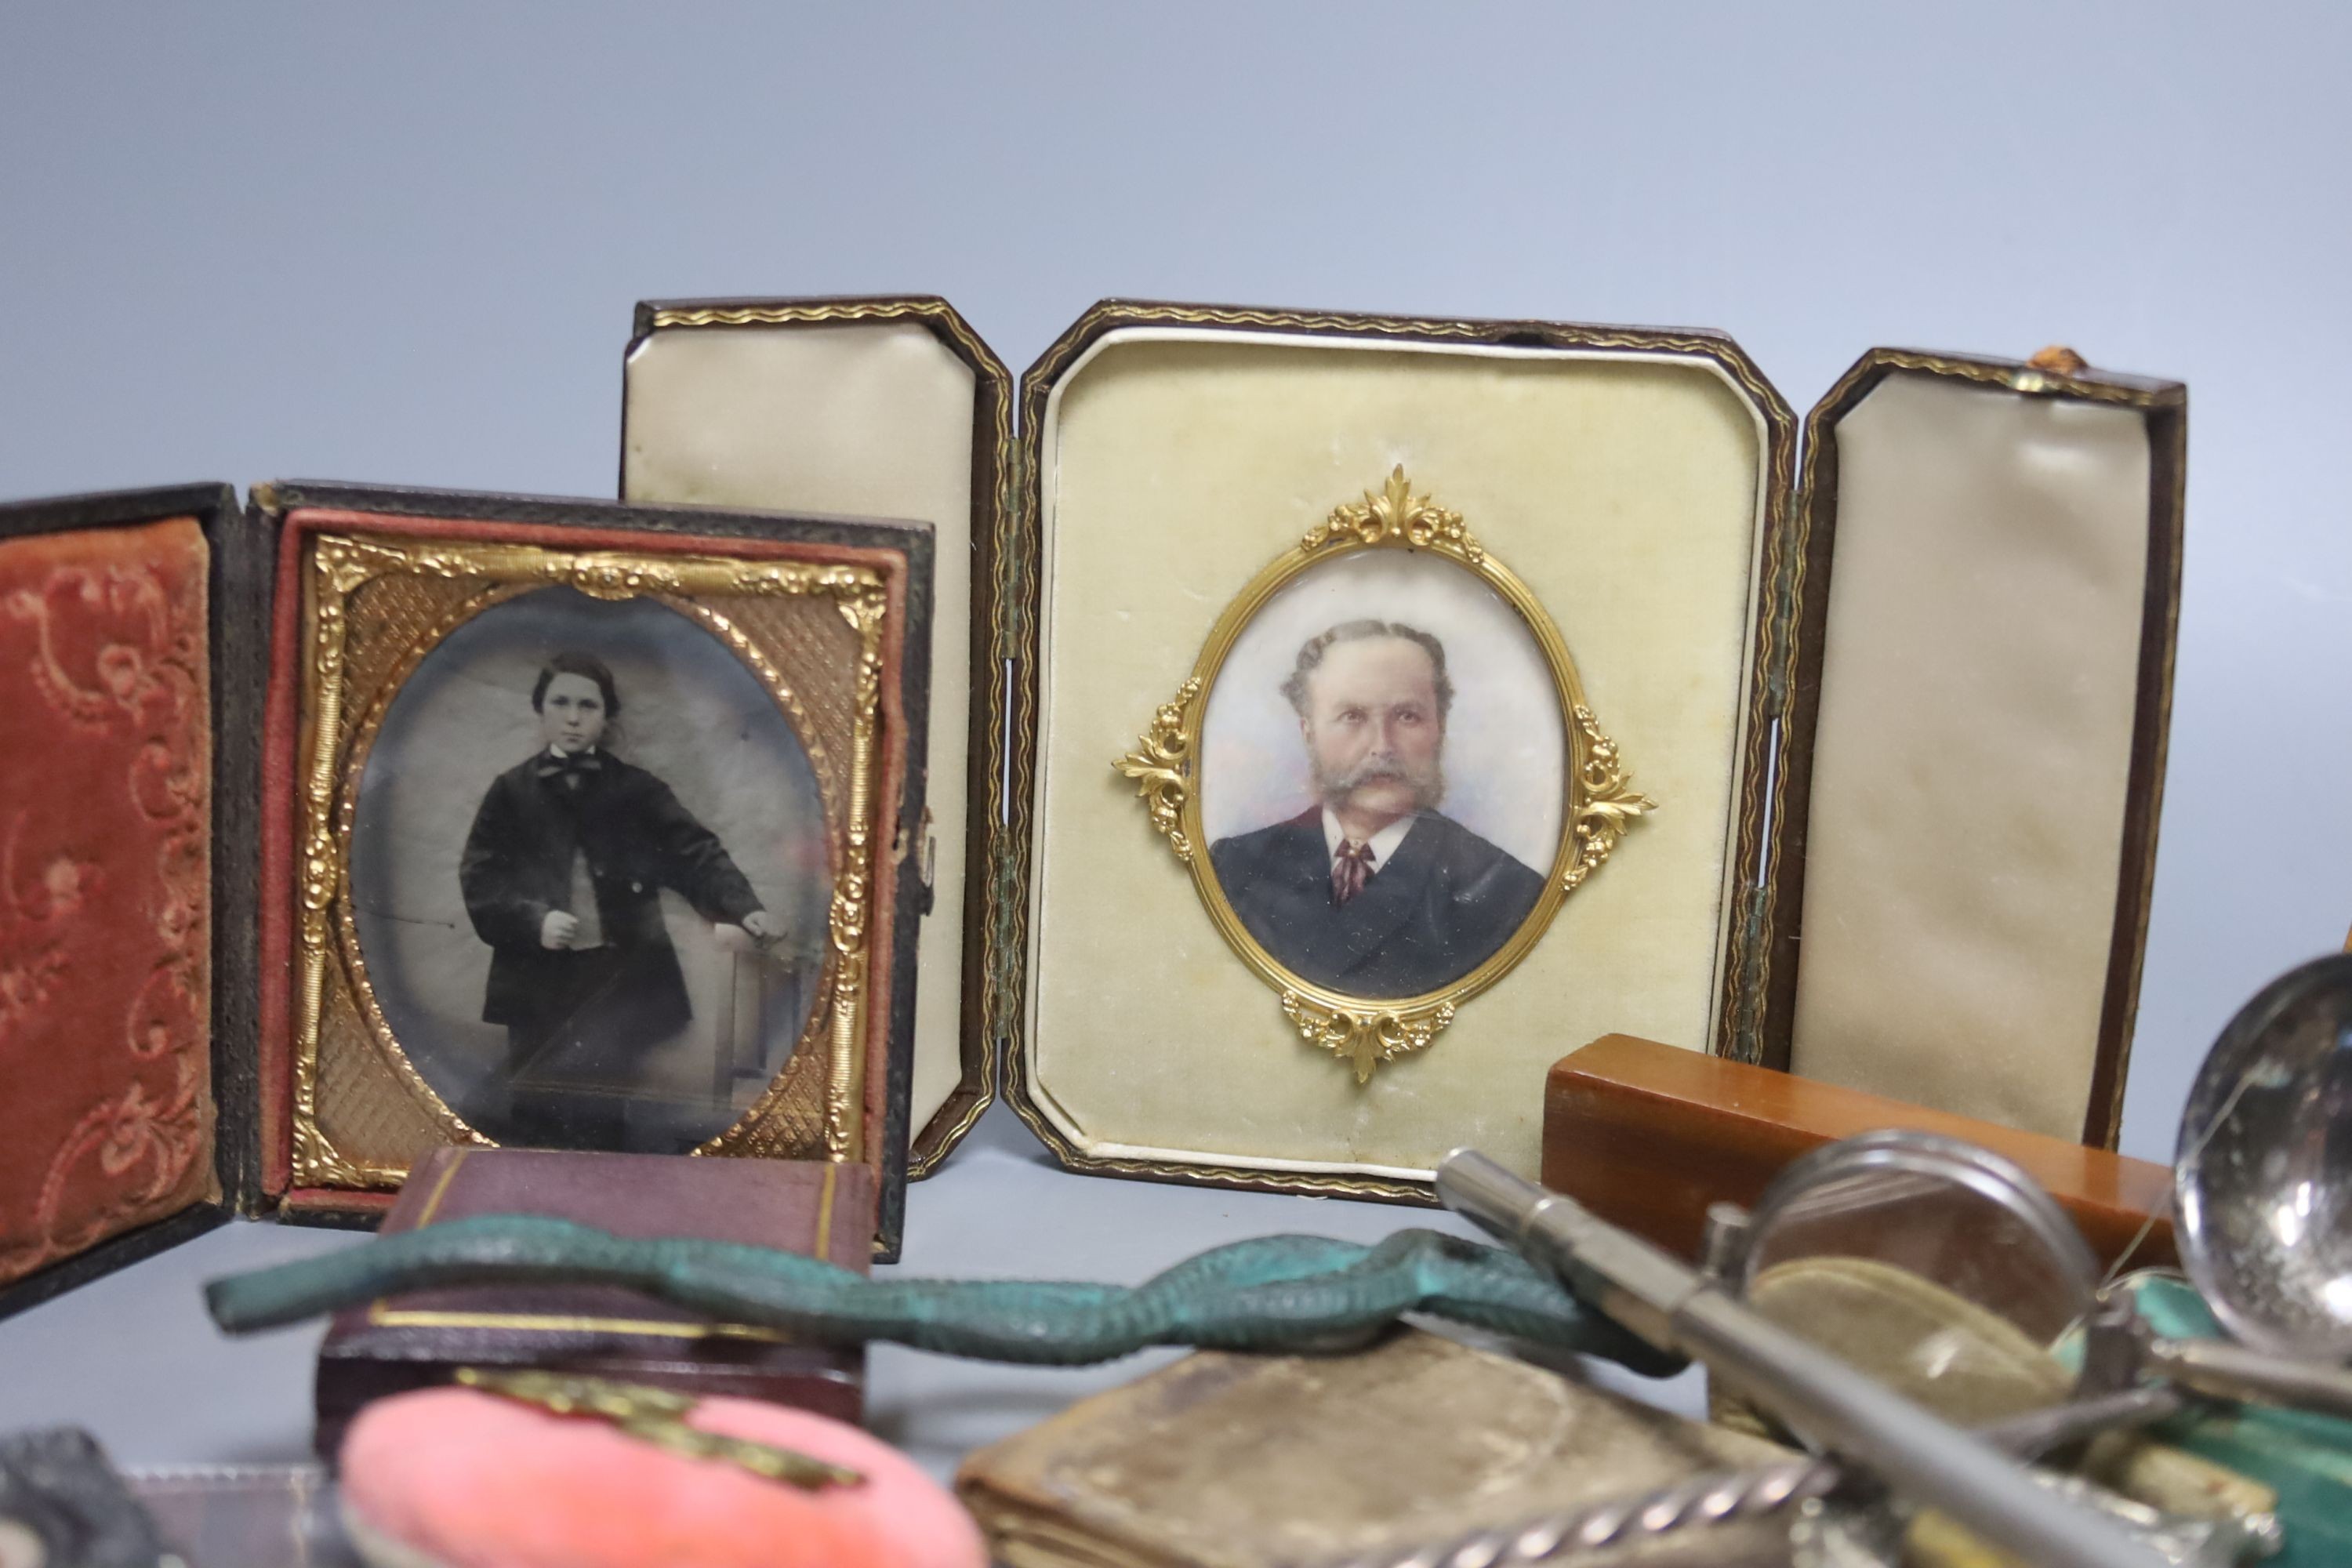 A box of objects of vertu, portrait miniature, coins and medals